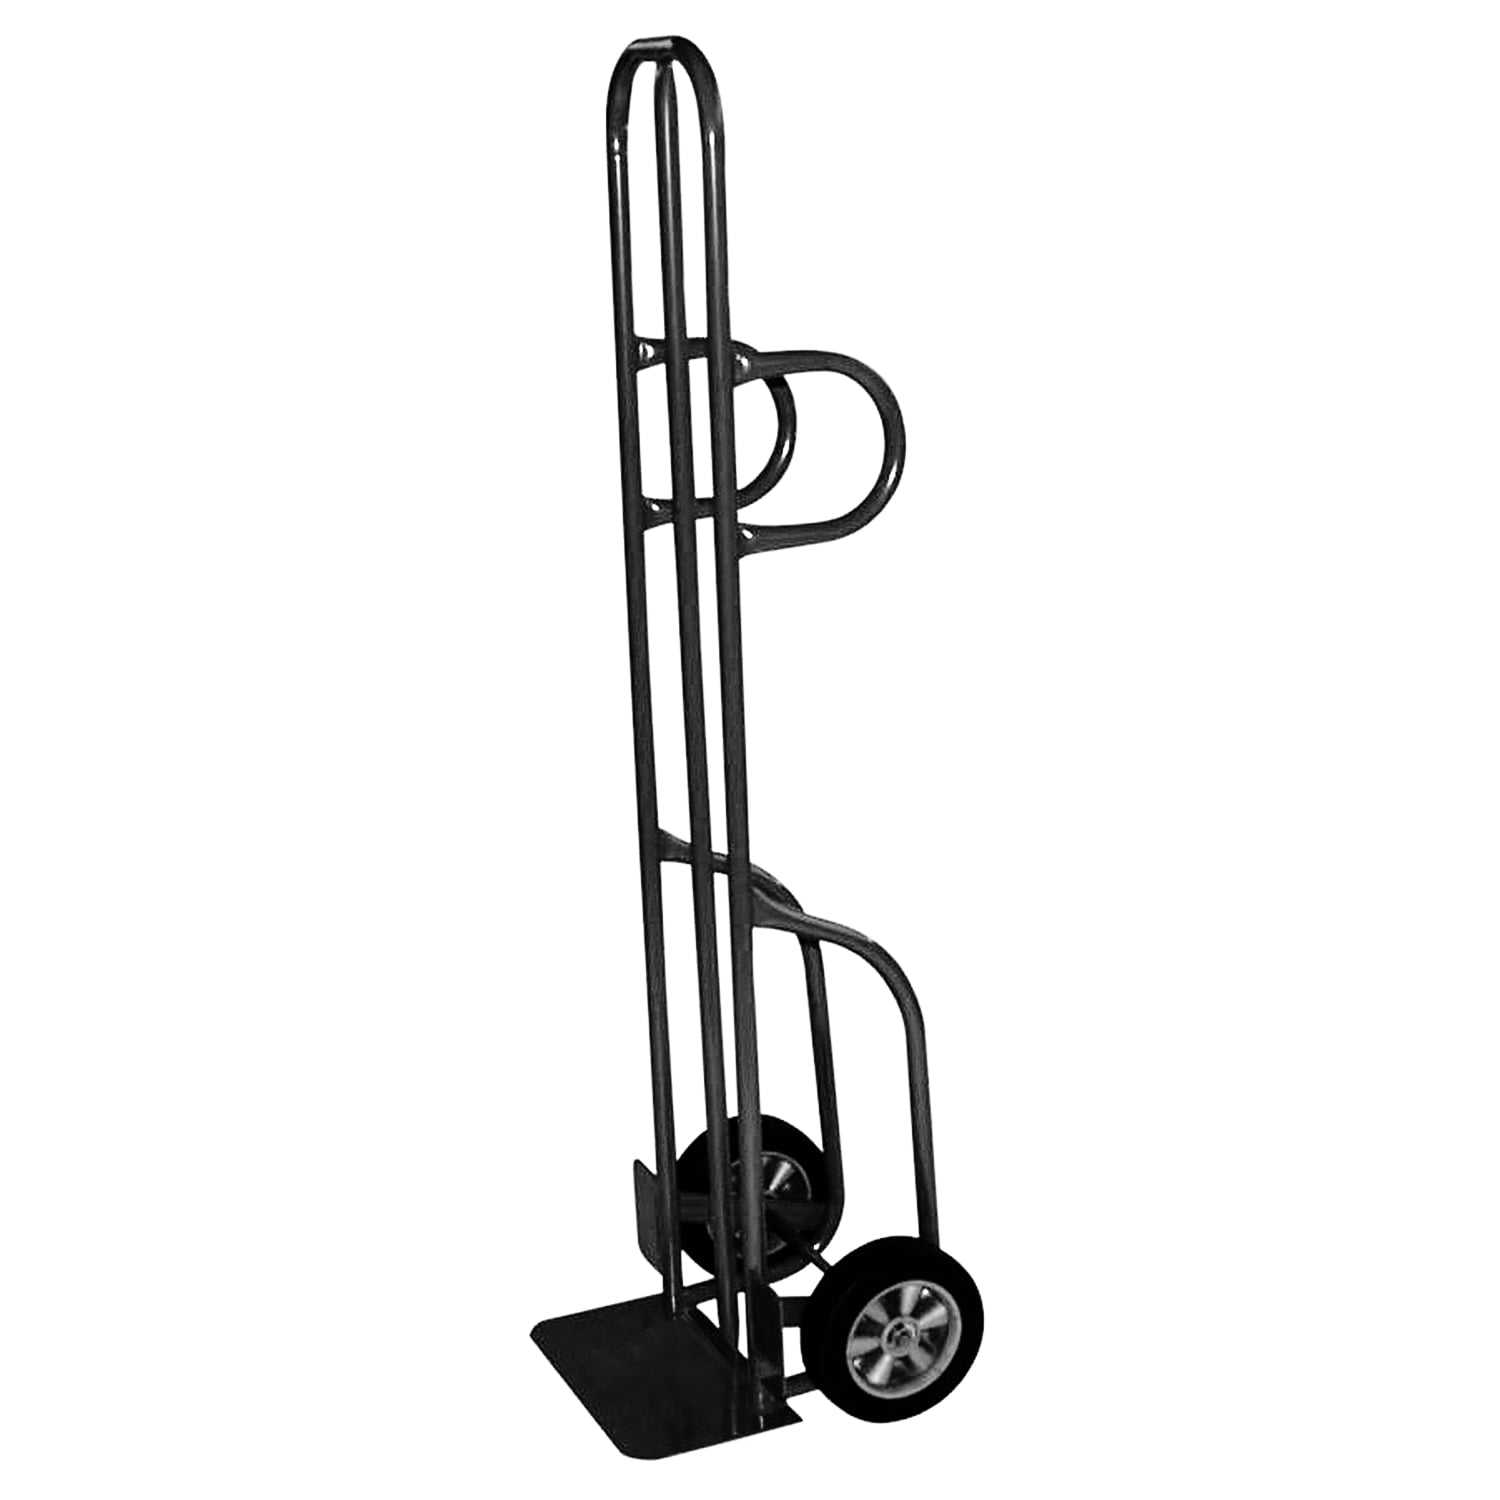 Tyke Supply Aluminum Stair Climber Hand Truck With Extension Nose HS-1 